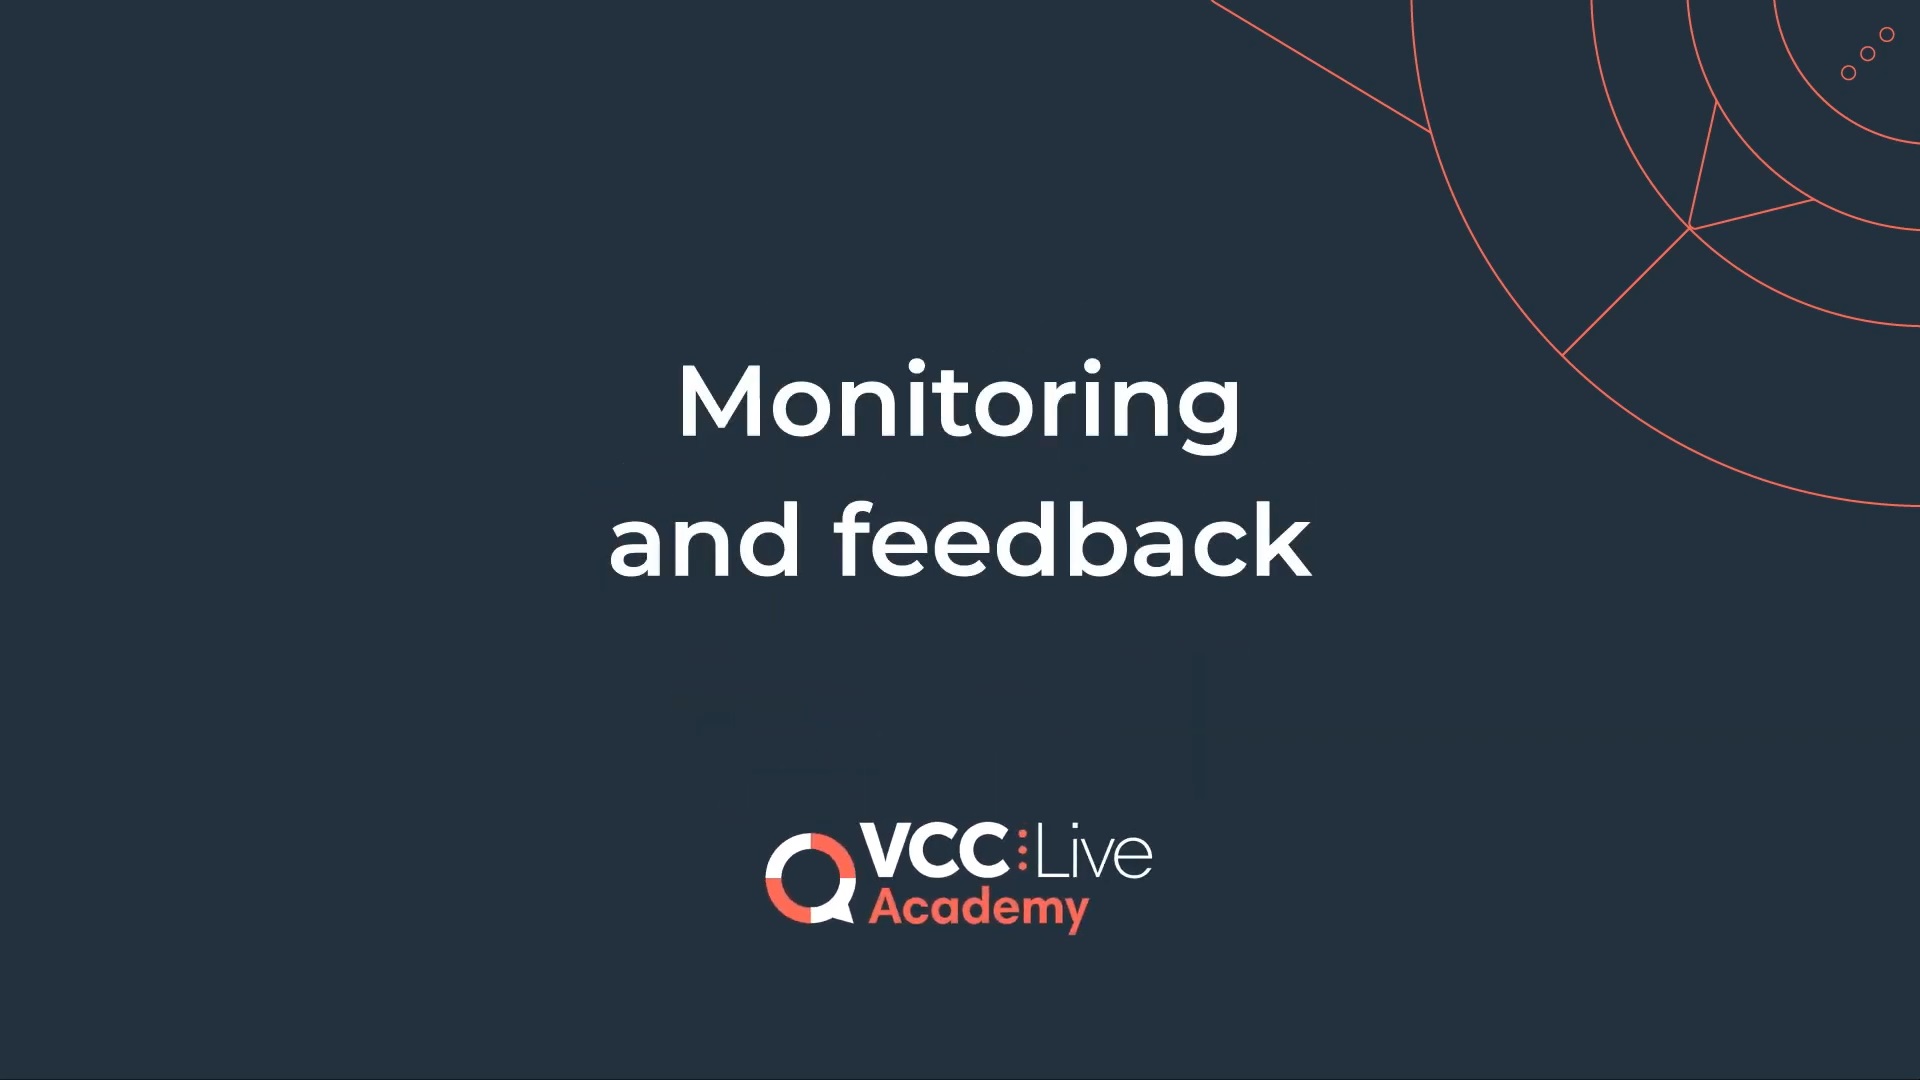 https://vcc.live/wp-content/uploads/2022/08/remote-agents-course-monitoring-feedback.jpg